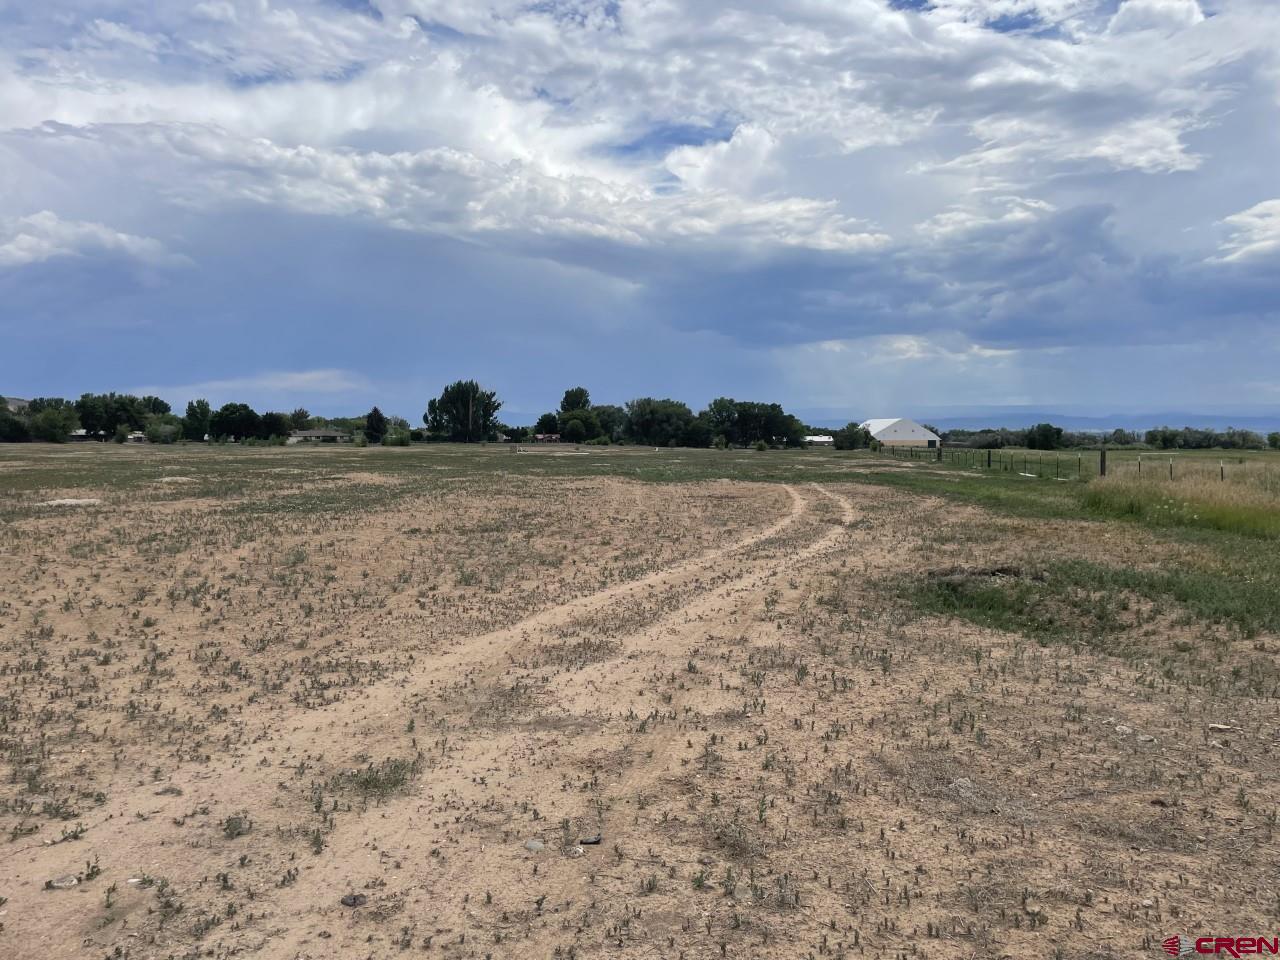 Newly approved 10.88 acre lot. This is one lot of a two lot subdivision. Plat to be recorded soon. Great views of the Grand Mesa and valley. Paid Orchard City water tap plus irrigation water. Septic required. All other utilities available, including Elevate Fiber internet. No covenants, no HOA. An ideal setting to establish your country living dream.